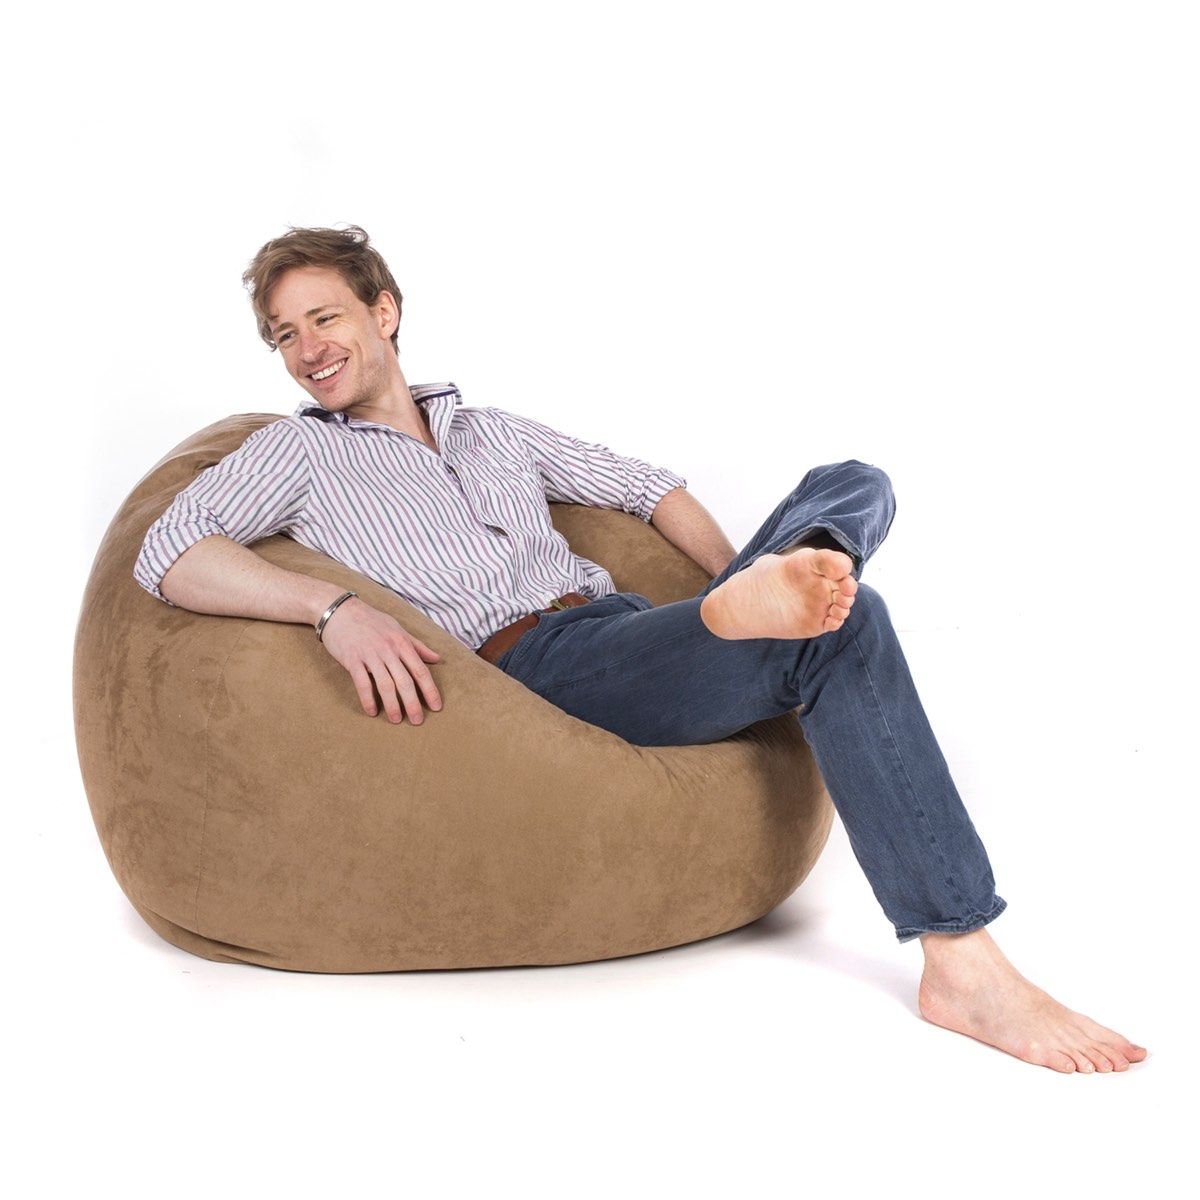 LEXAVI Brand - 4XL Ready to Use | Bean Bag & Footrest Filled with Beans -  (Faux Leather) - (Gold) : Amazon.in: Home & Kitchen